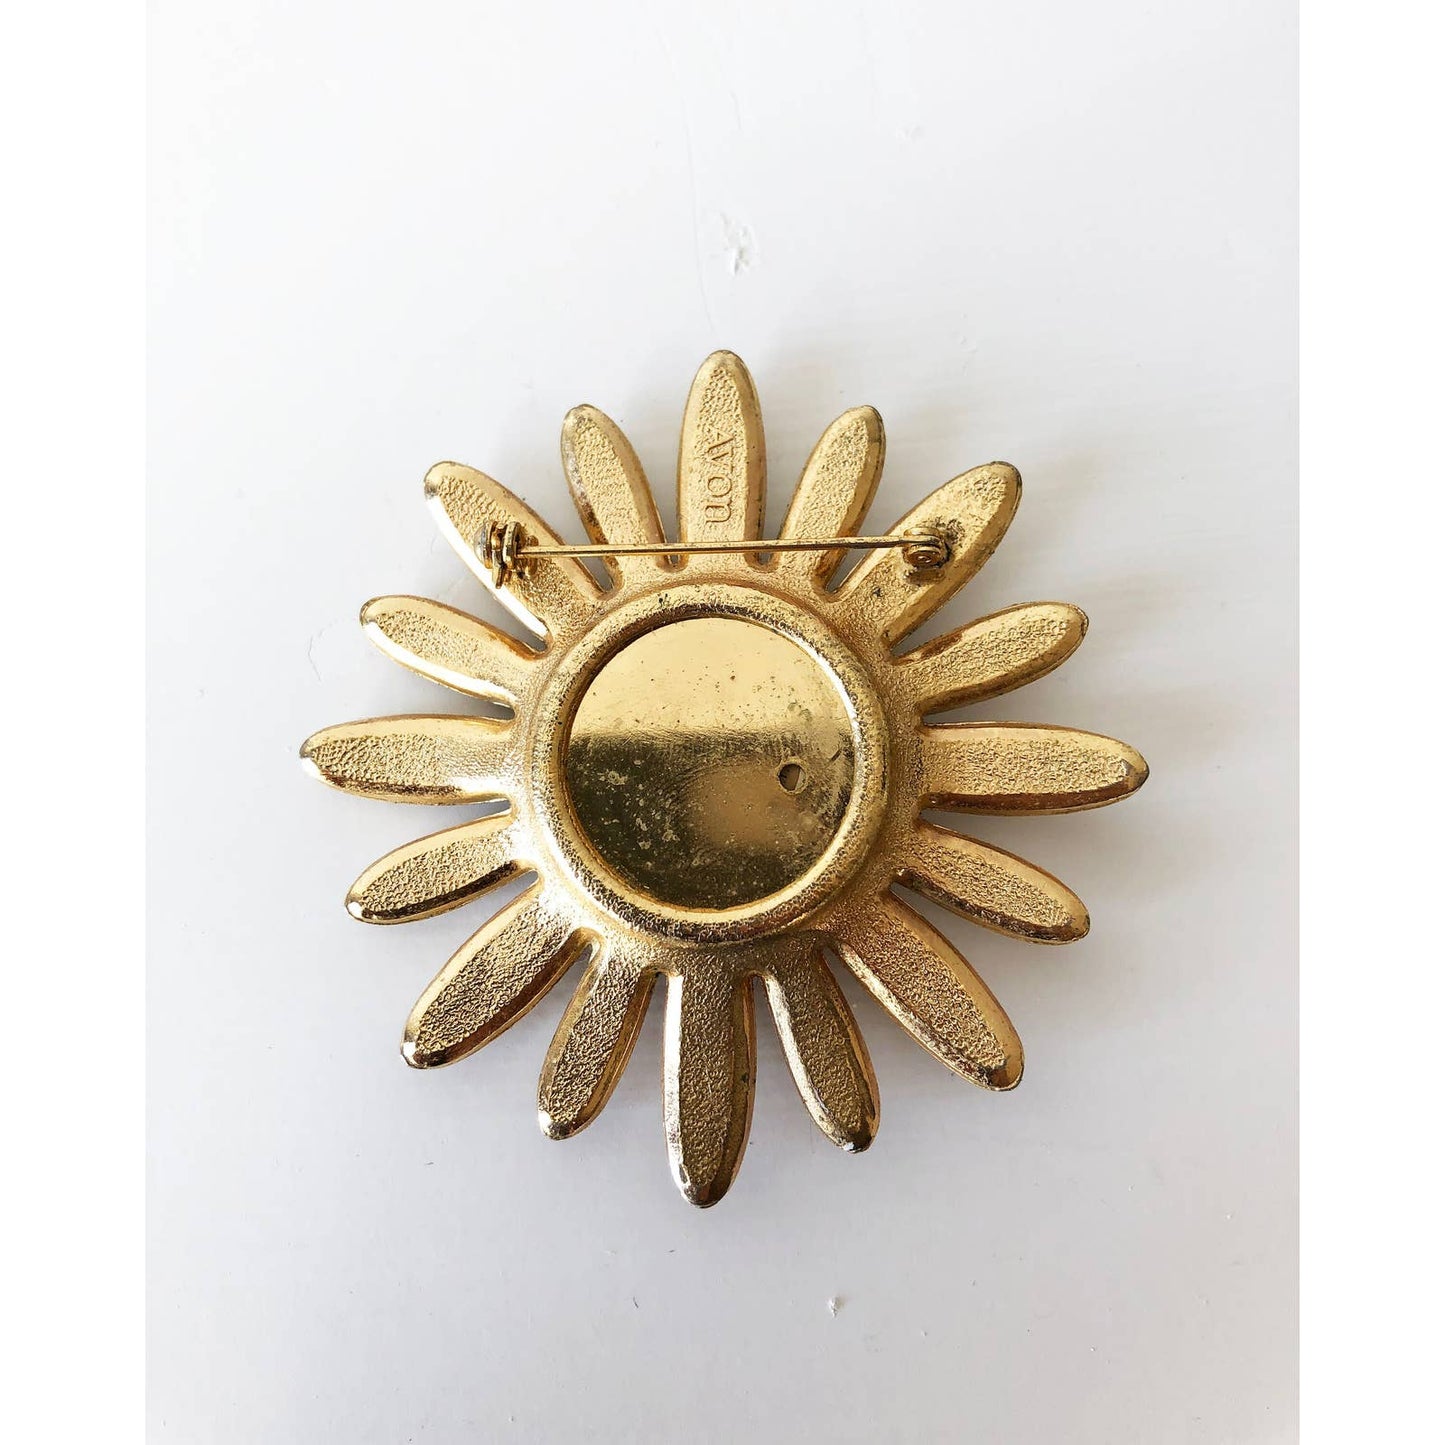 Daisy Flower Pin - White and Gold - Pill Pocket Pin